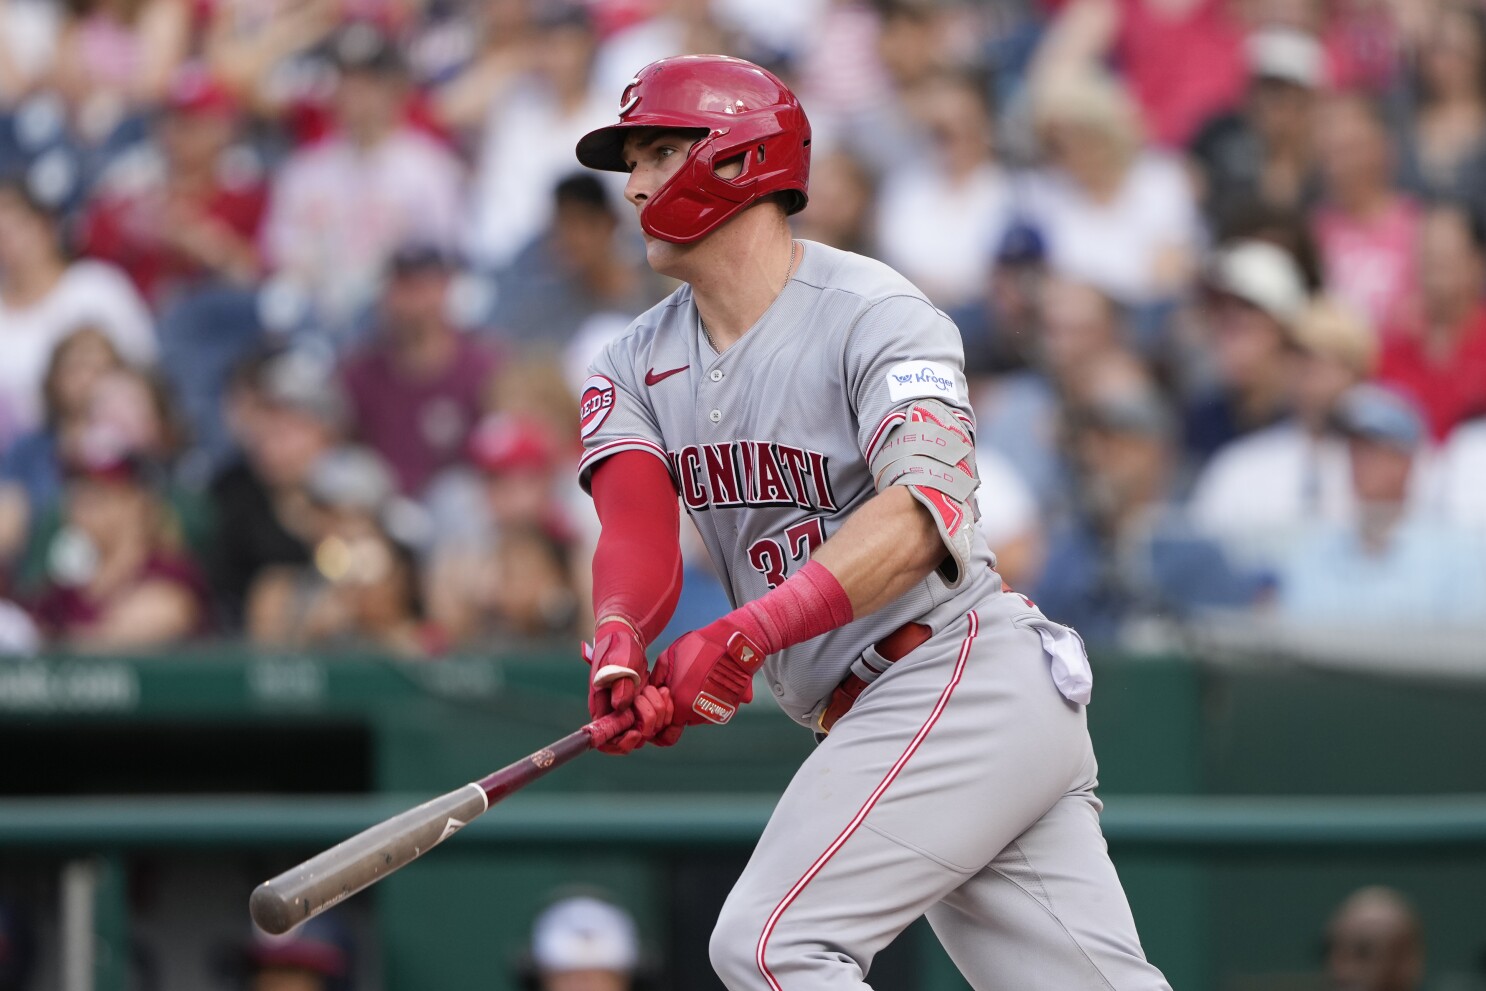 Reds rout Nationals 9-2 to keep slim playoff hopes alive - Washington Times